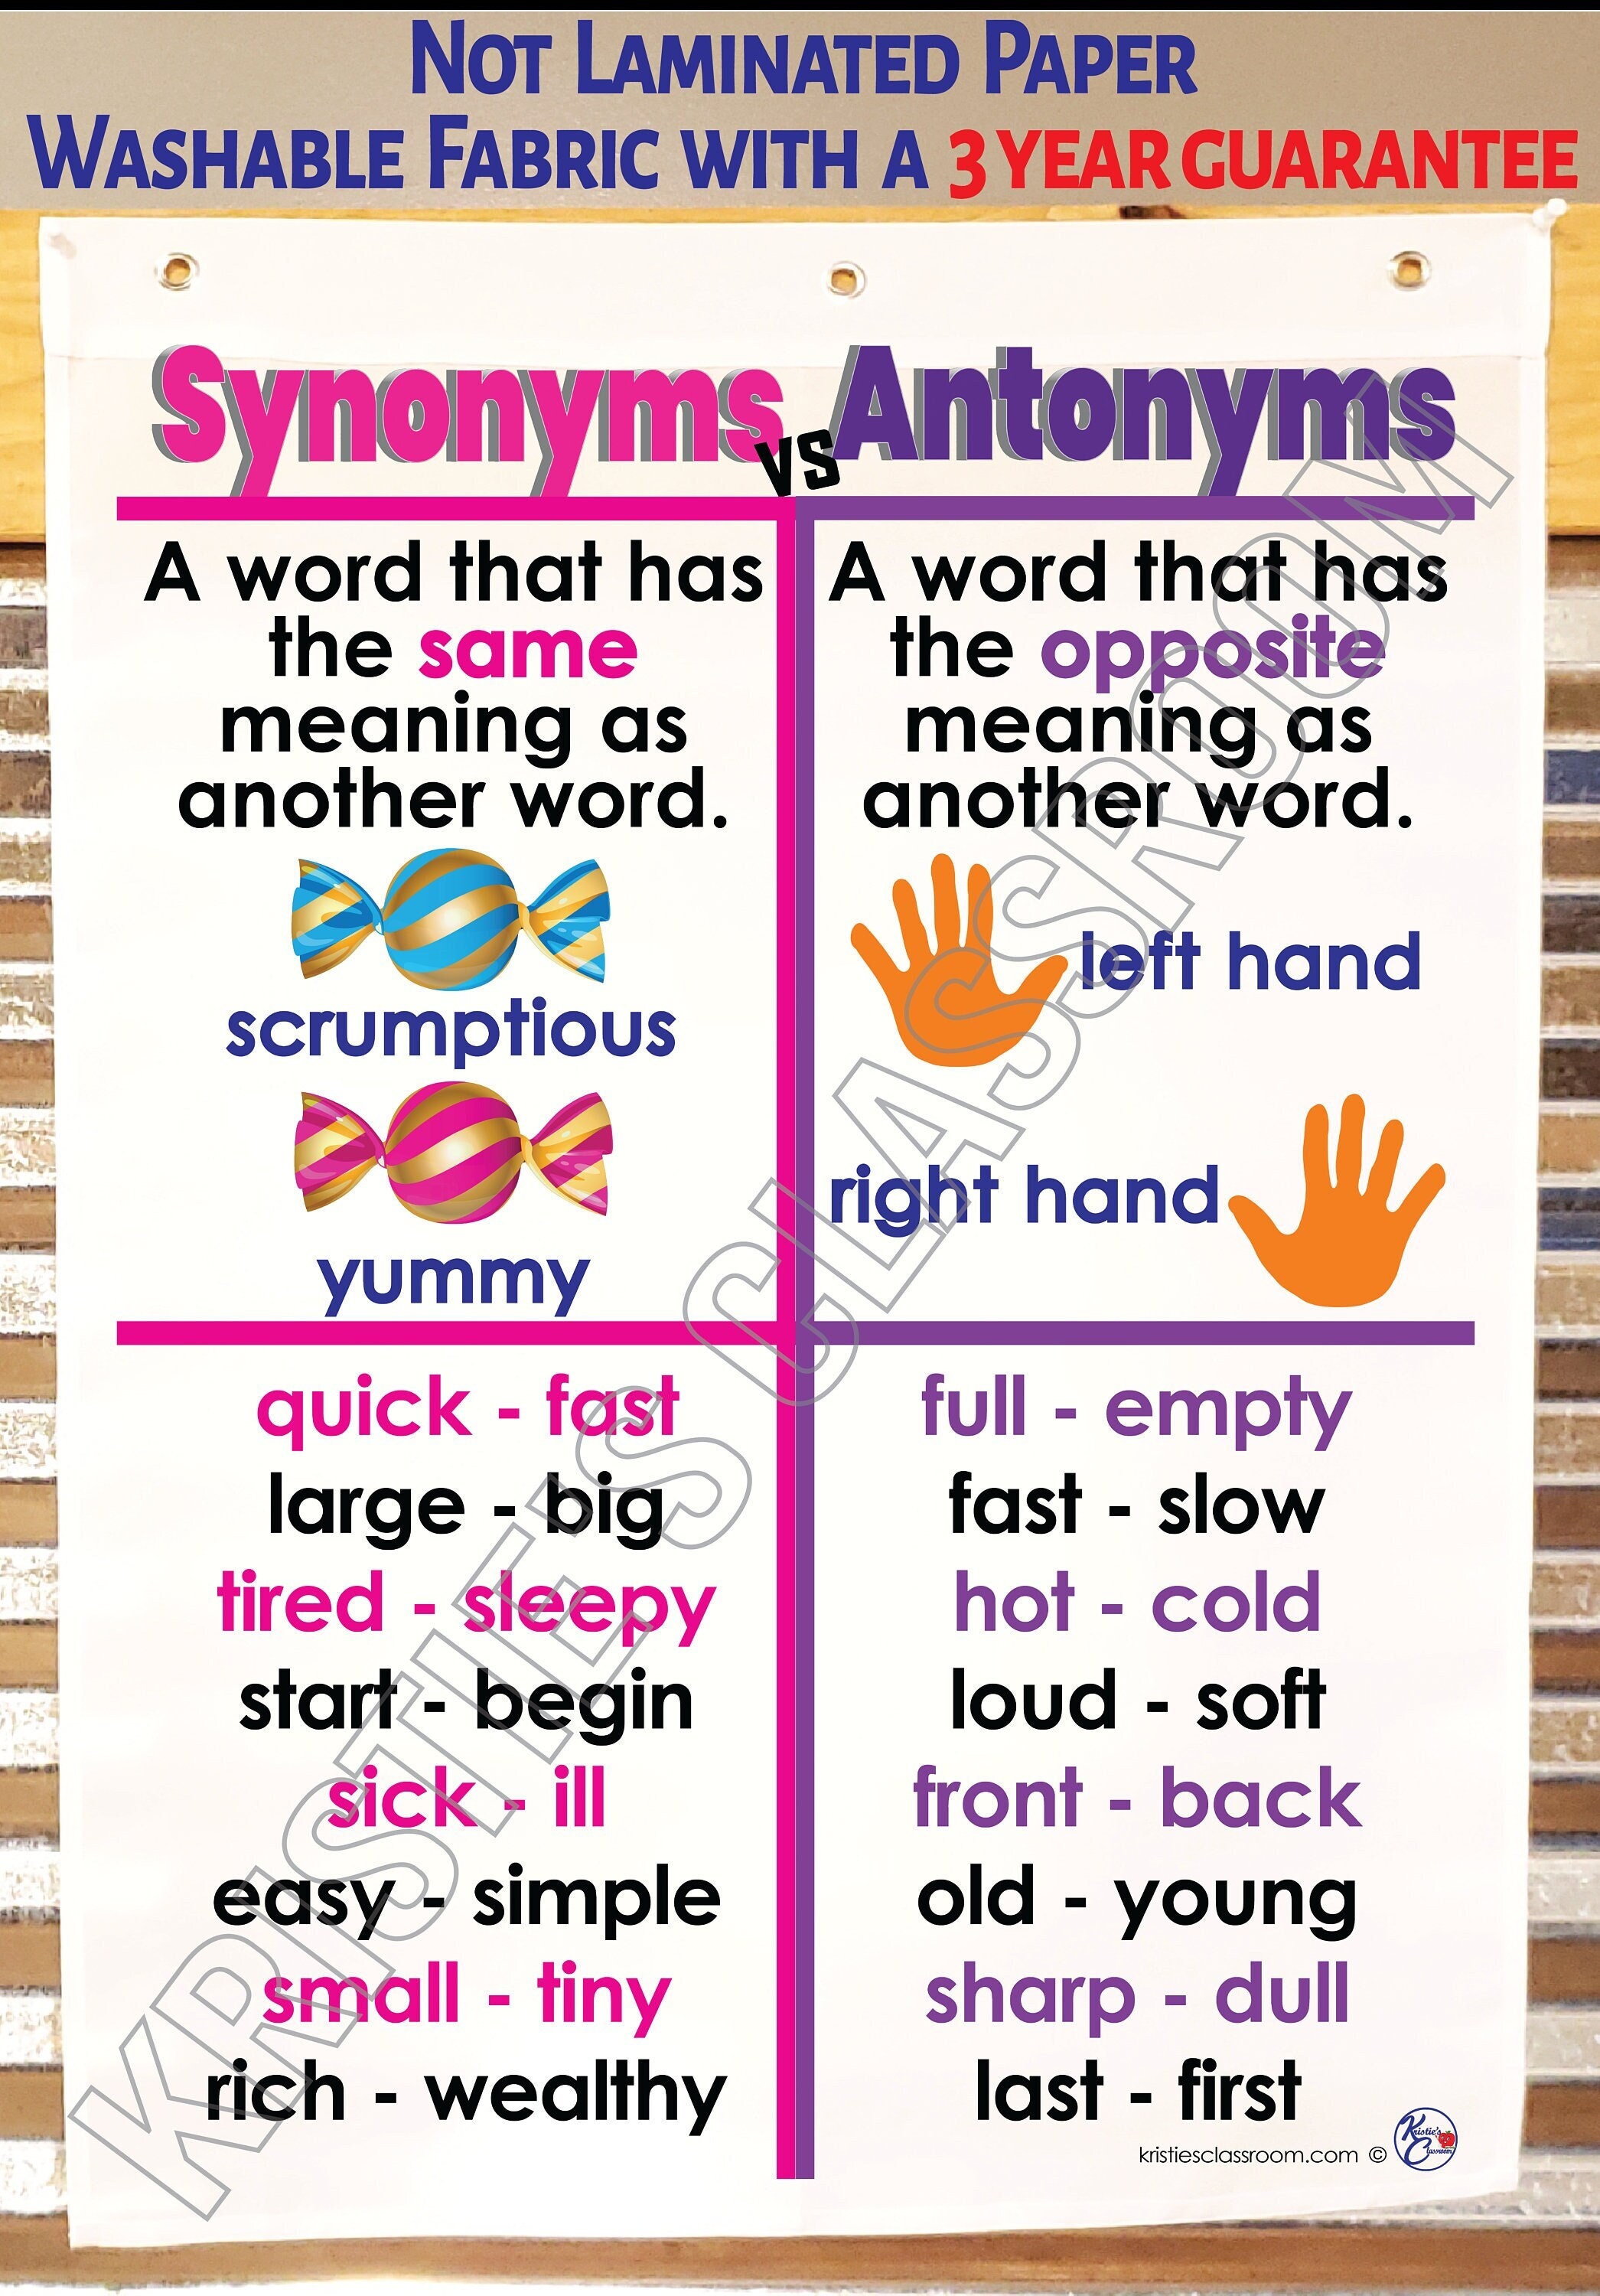 What is Comprehension Anchor Chart 